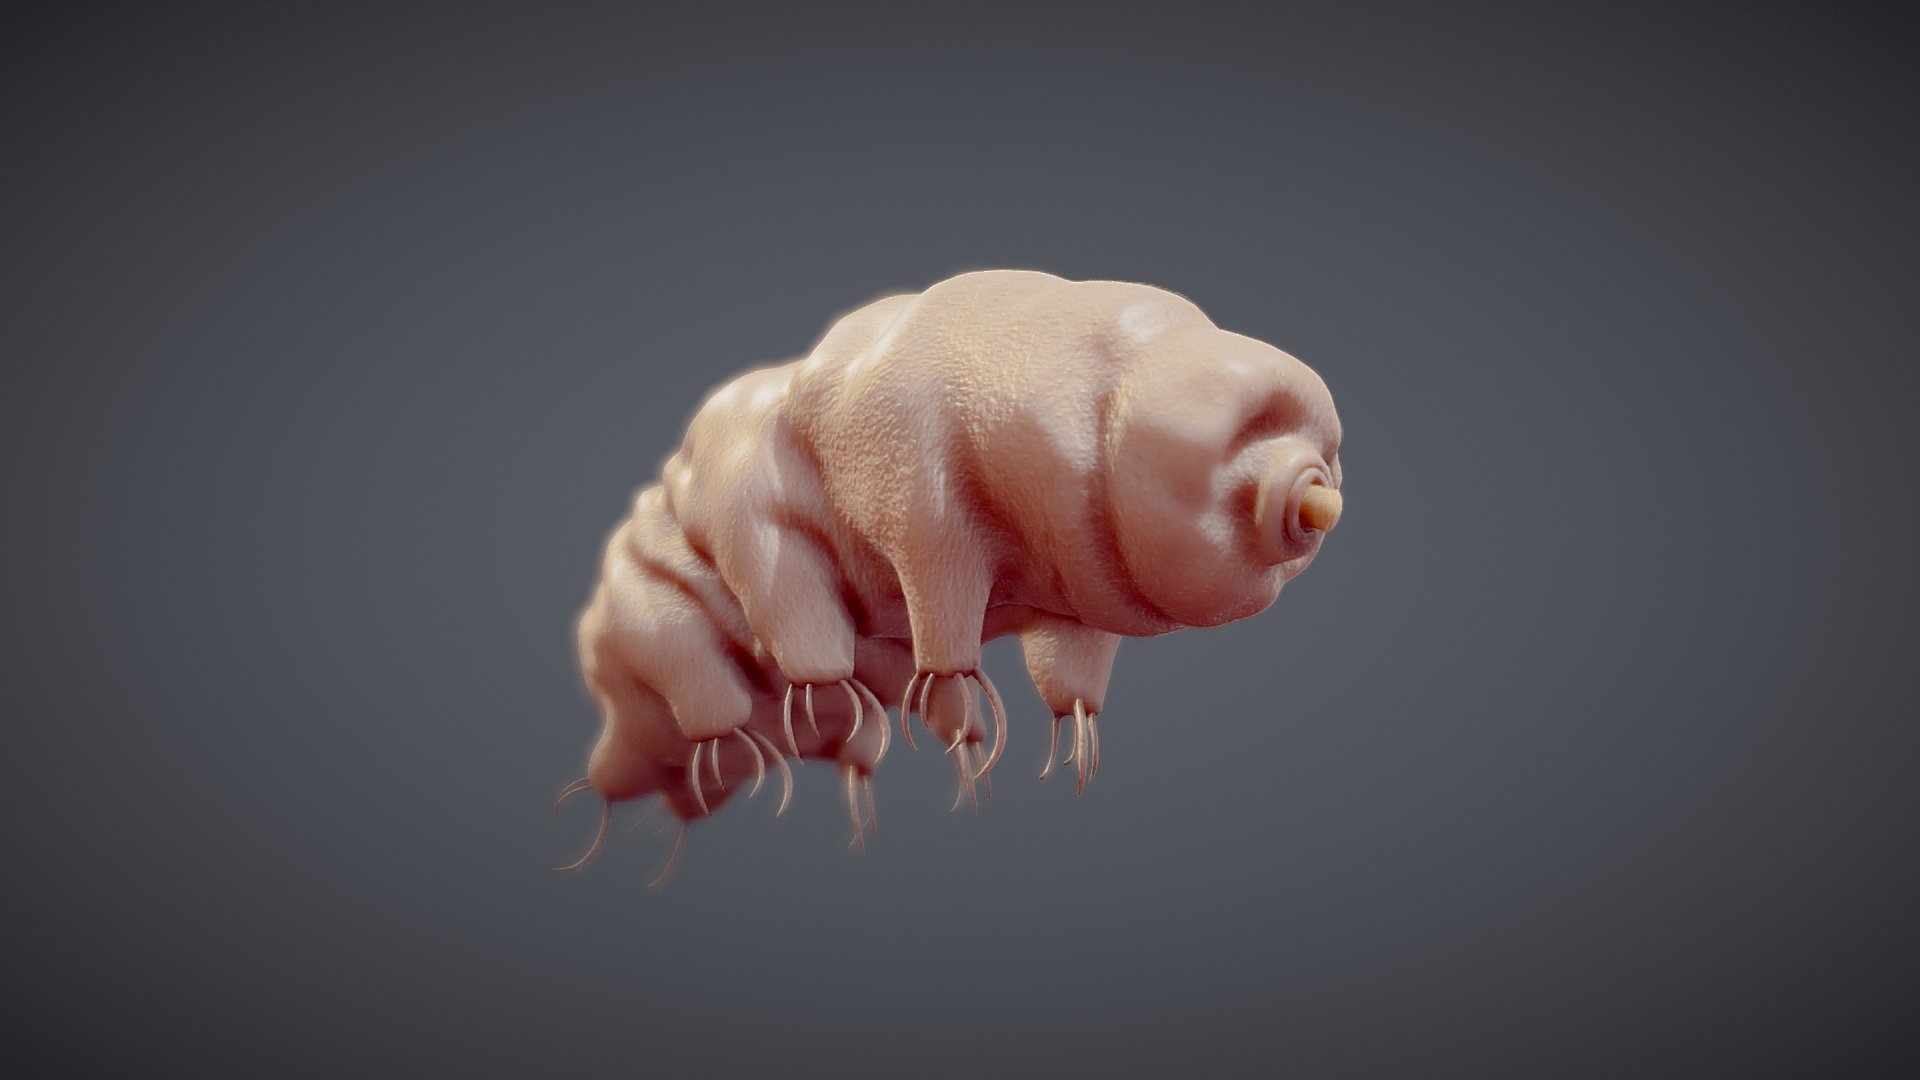 Tardigrade

Tardigrades known colloquially as water bears or moss piglets, are a phylum of eight-legged segmented micro-animals.They have been found in diverse regions of Earth's biosphere – mountaintops, the deep sea, tropical rainforests, and the Antarctic. Tardigrades are among the most resilient animals known, withindividual species able to survive extreme conditions.




Format: FBX, Alembic, Blender v3.4.0

Optimized UVs (Non-Overlapping UVs)

4k Maps (PBR)

Base Color (Albedo)

Normal Map

AO Map

Metallic Map

Roughness Map

Height Map

Render scene in Blender

 - Tardigrade Water Bear Animated - Buy Royalty Free 3D model by Nima (@h3ydari96) 3d model